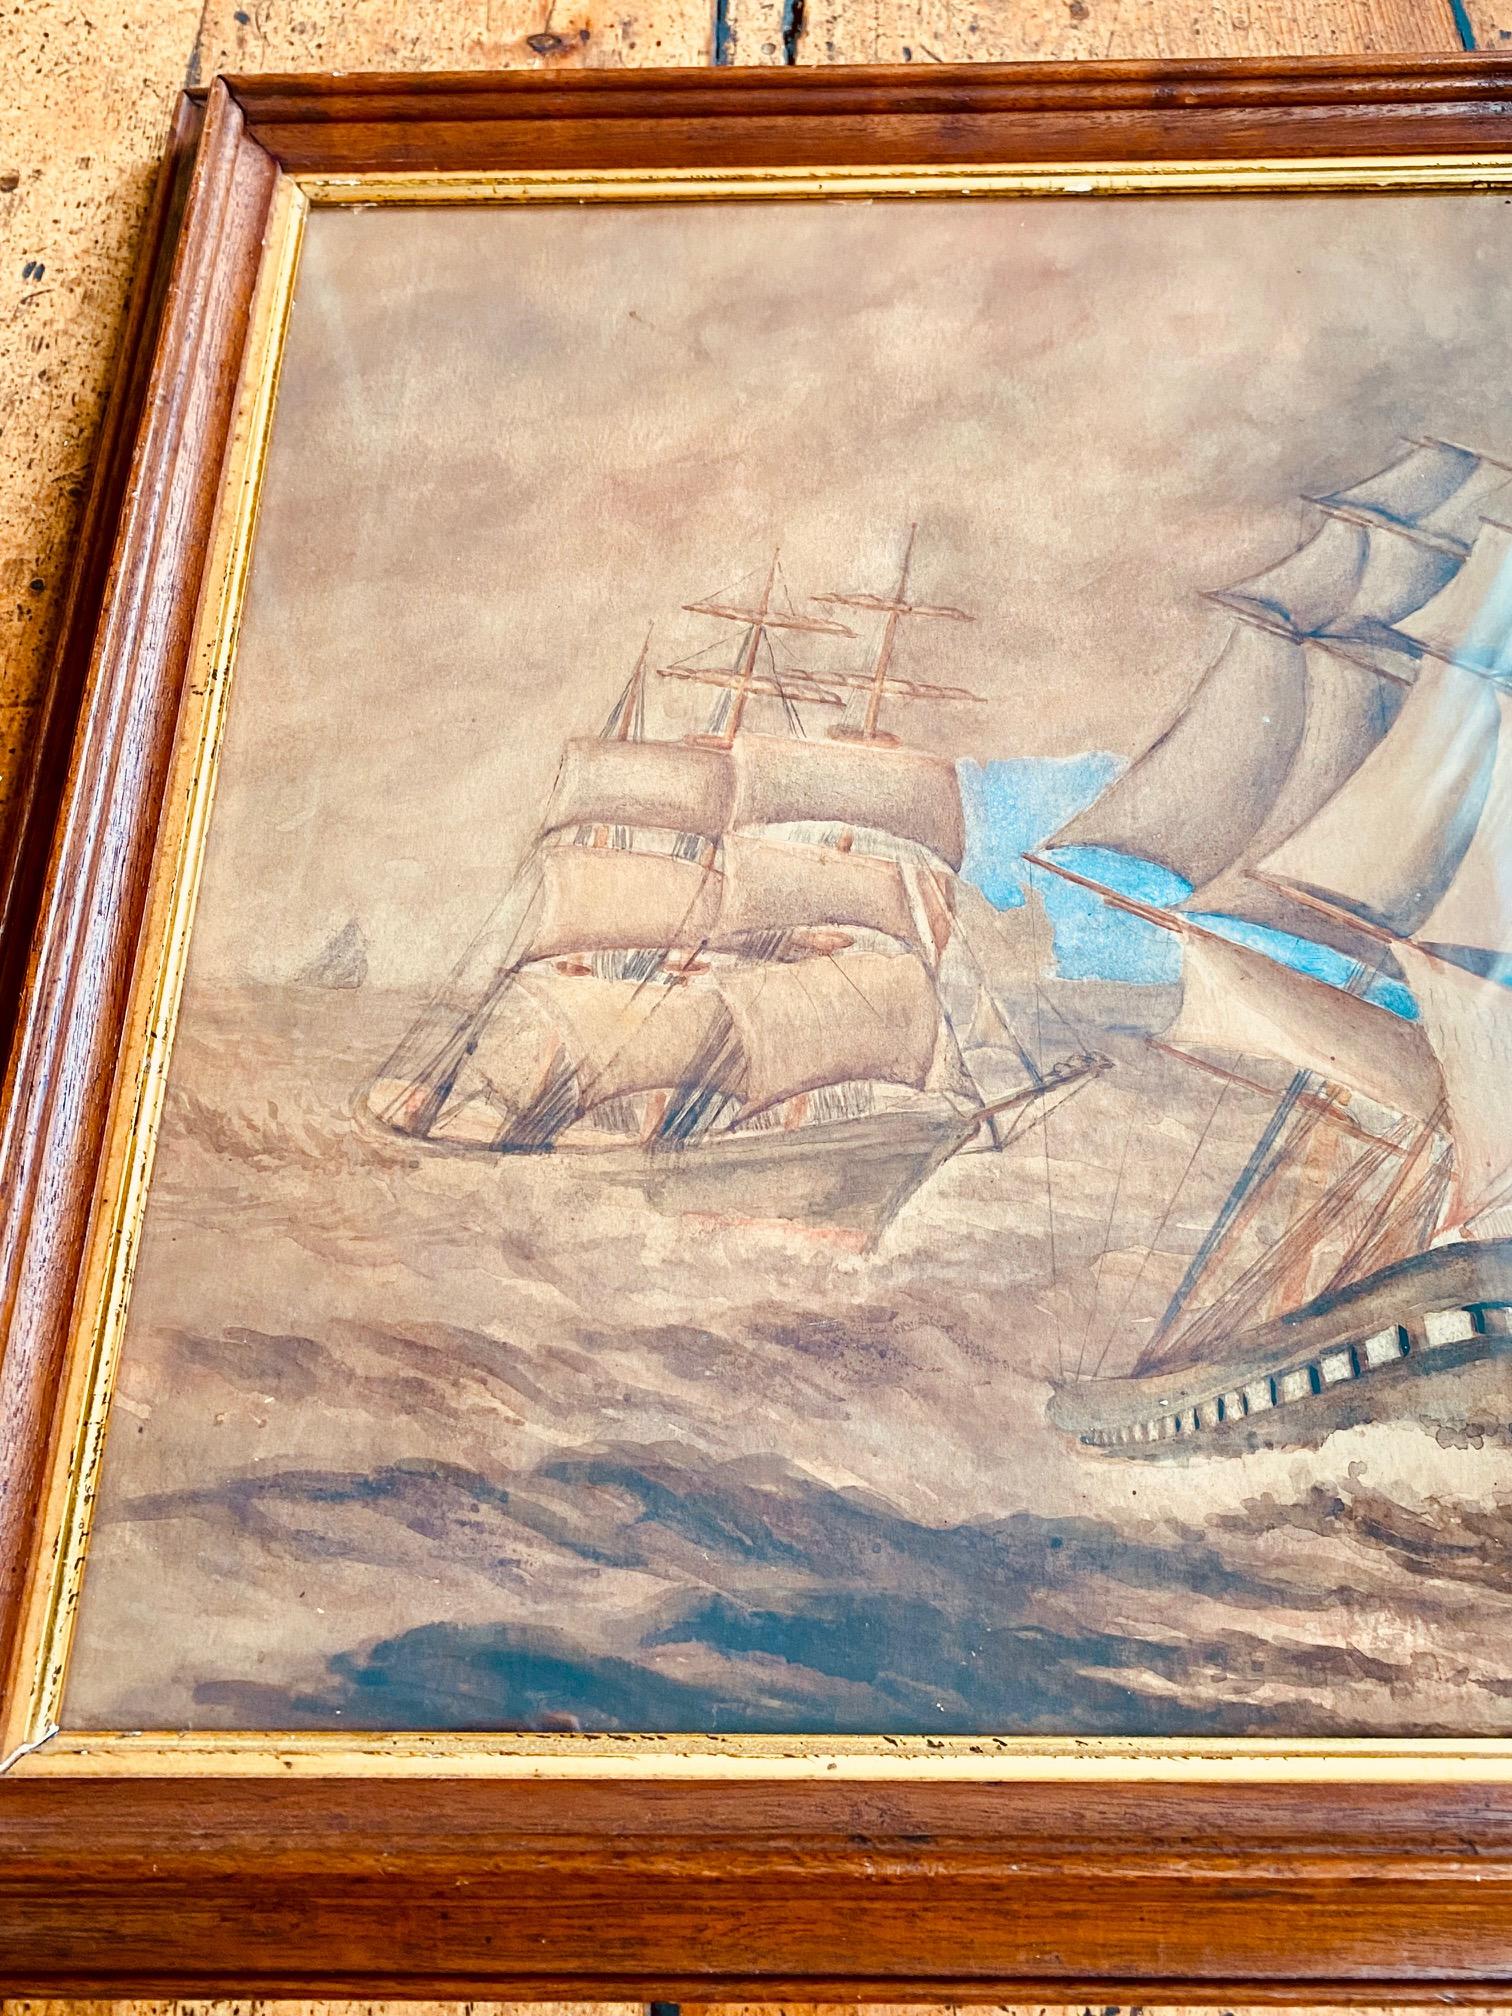 Antique Seascape with square-rigged ship racing a Barkentine, by C.A.S. Orne, 1920, a watercolor on paper stormy seascape with two square-riggers running before the wind, with choppy seas and storm clouds piling high, a lighthouse on the lee shore